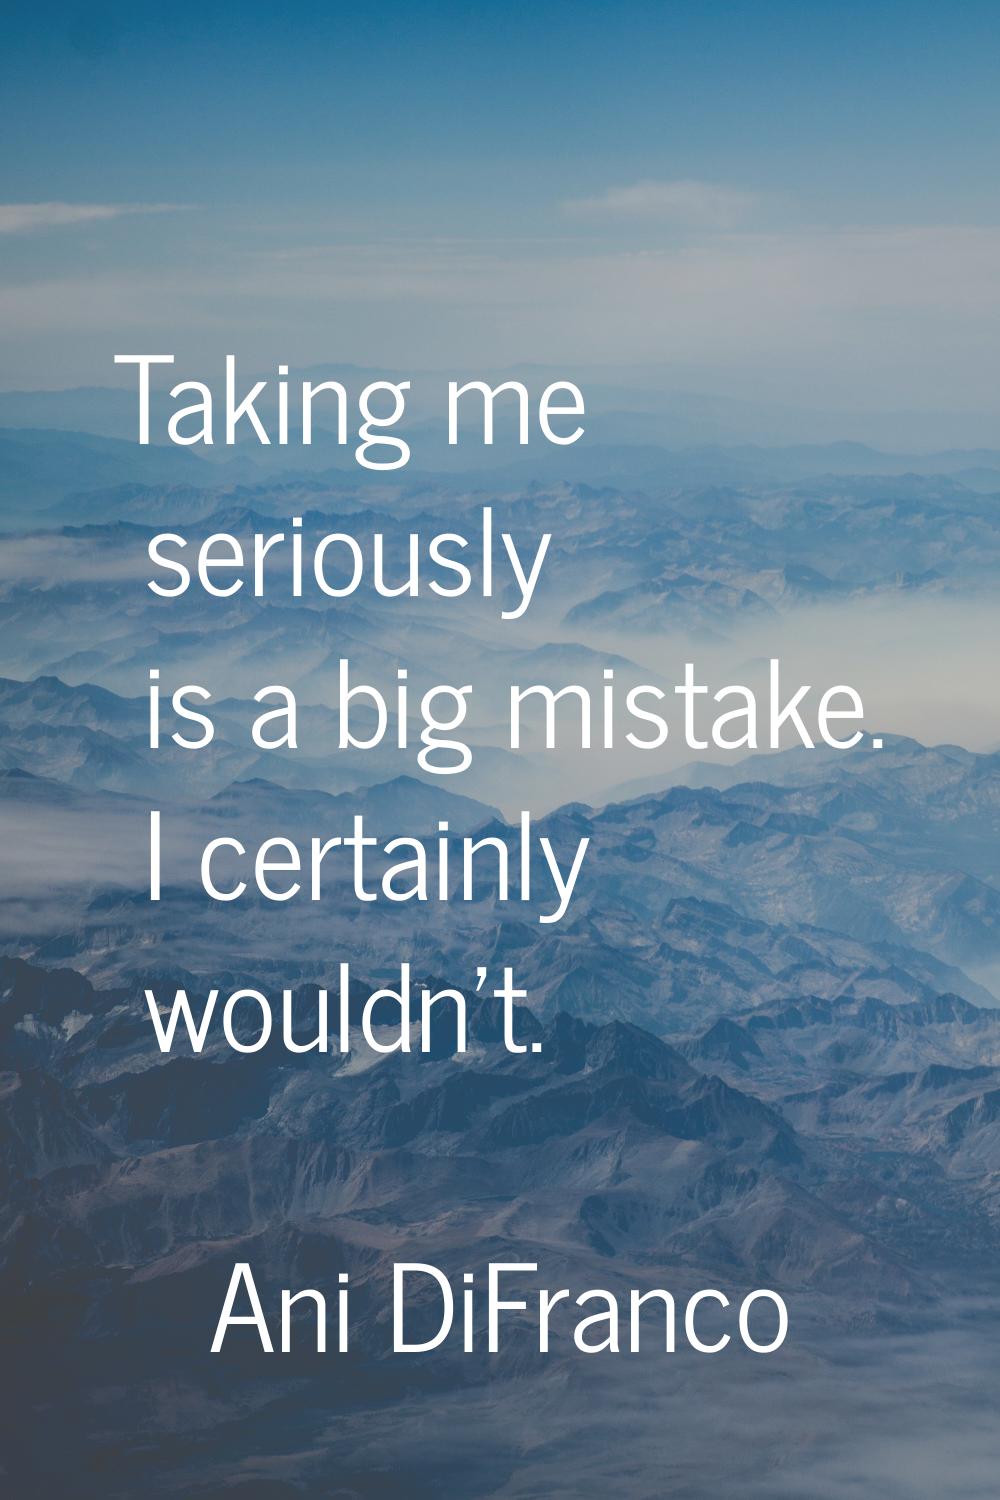 Taking me seriously is a big mistake. I certainly wouldn't.